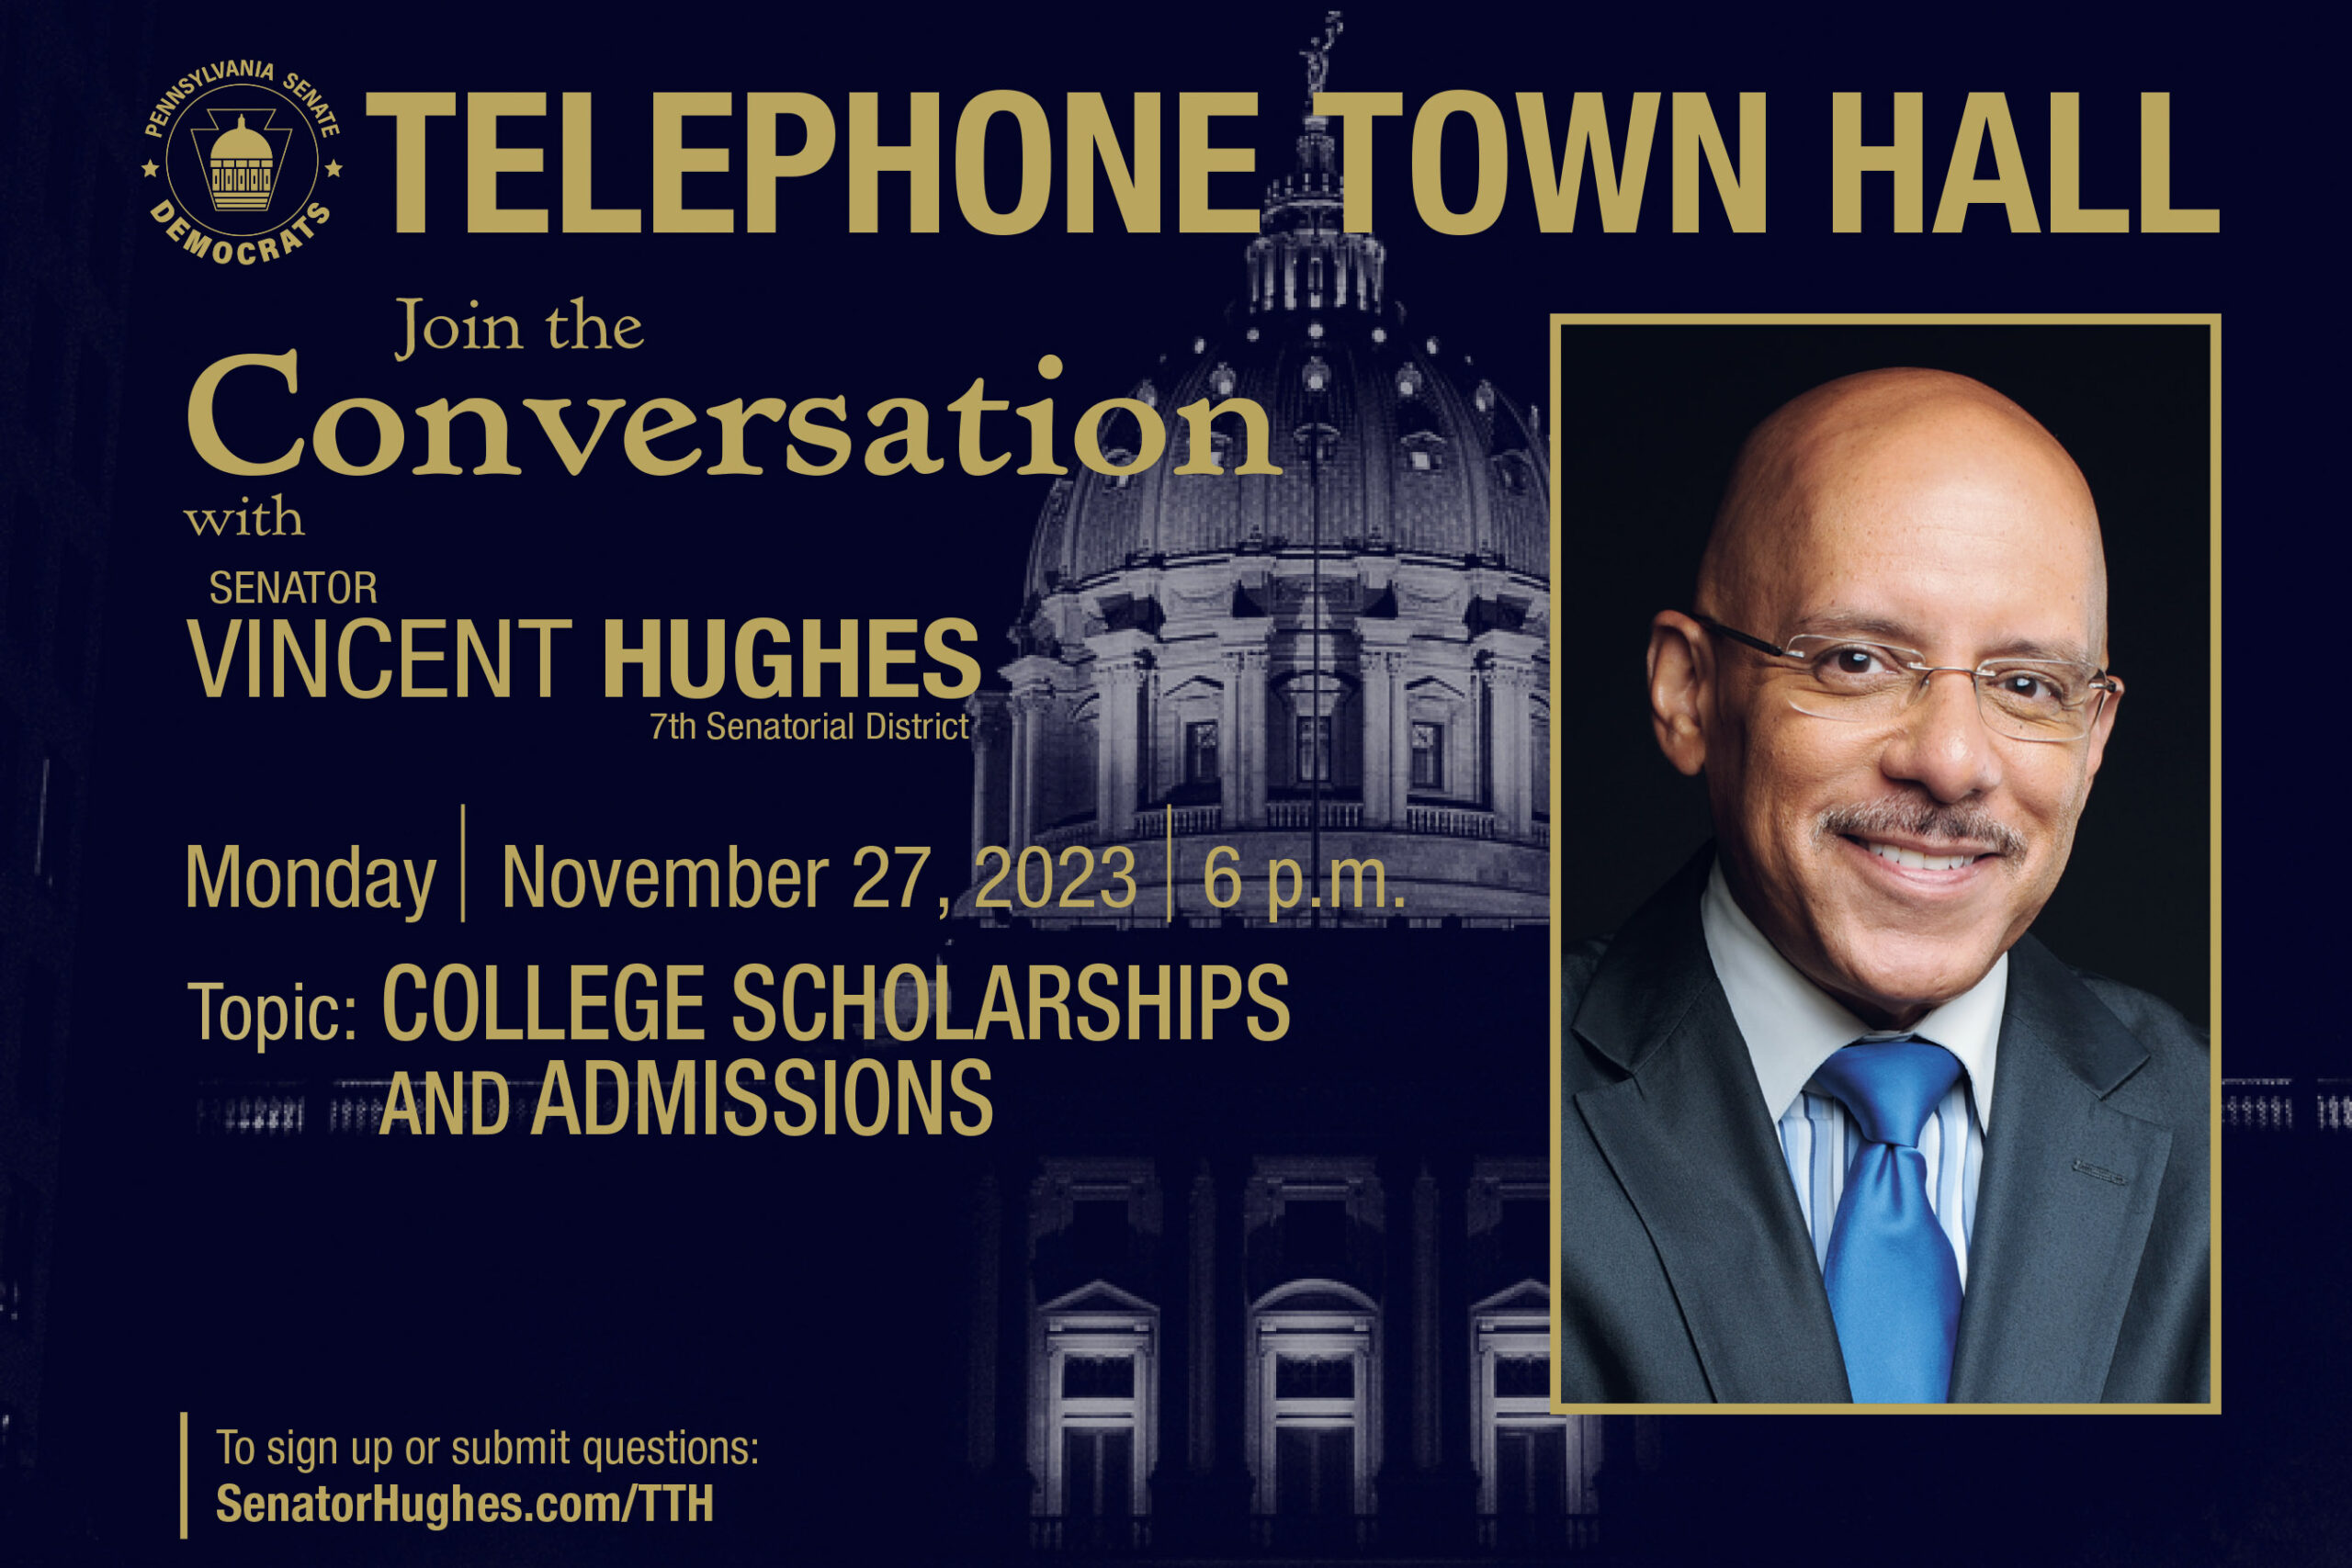 Telephone Town Hall - College Scholarships and Admissions